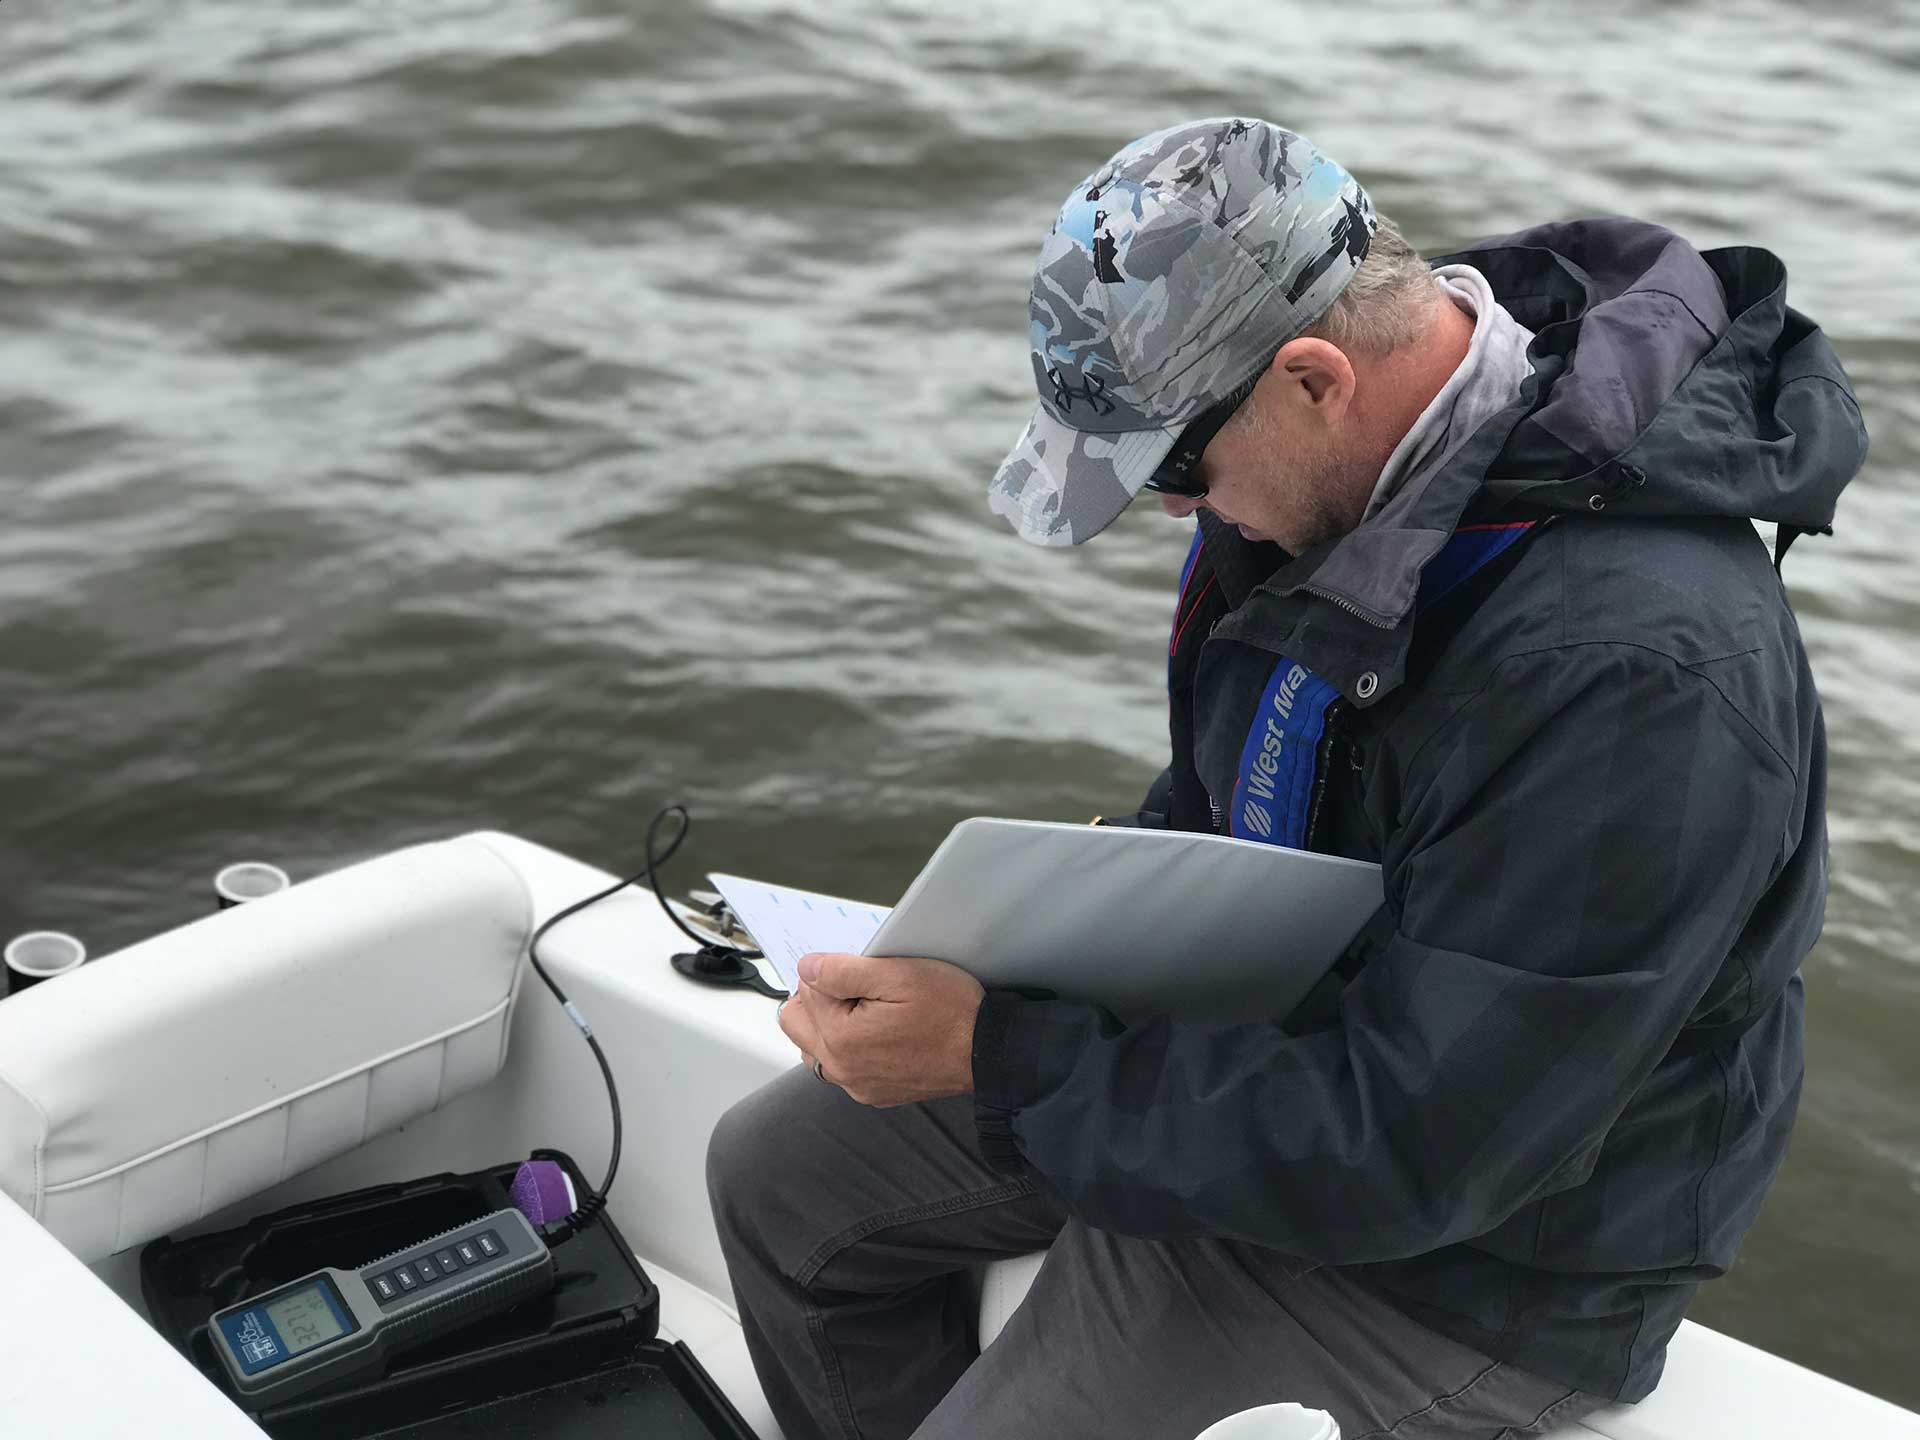 Taking water quality samples for a biological study in North Carolina's Outer Banks.